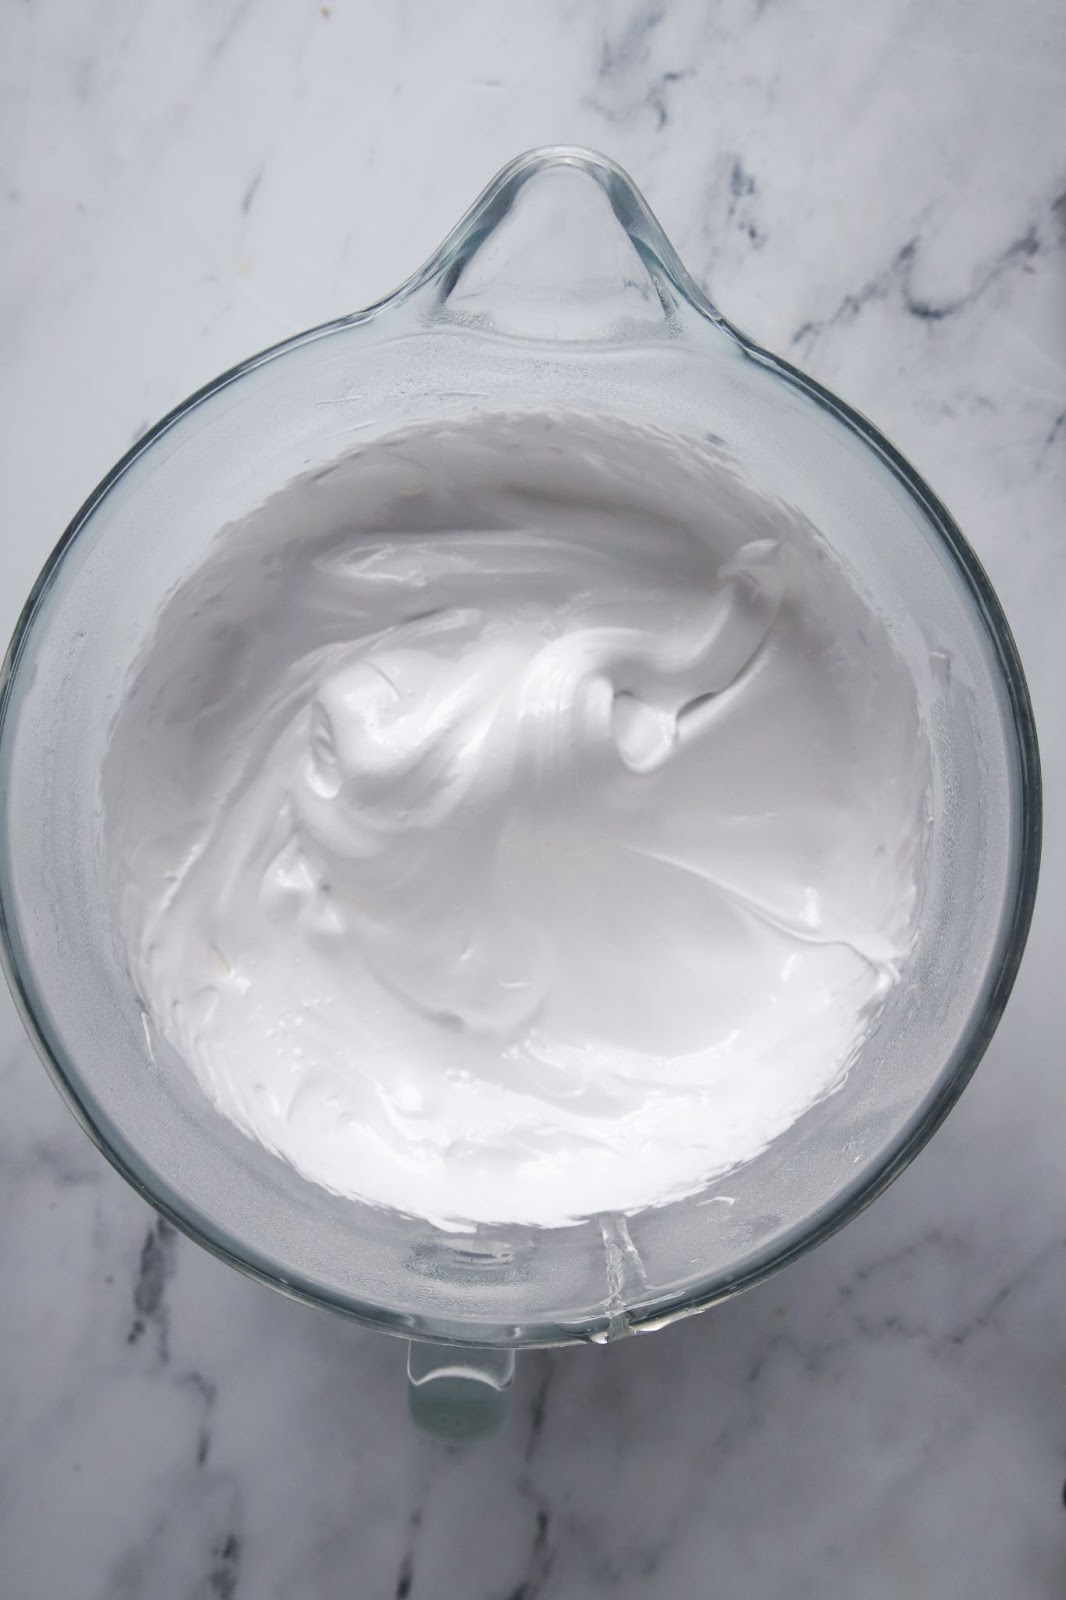 Marshmallow Fluff Recipe (only 6 ingredients!)